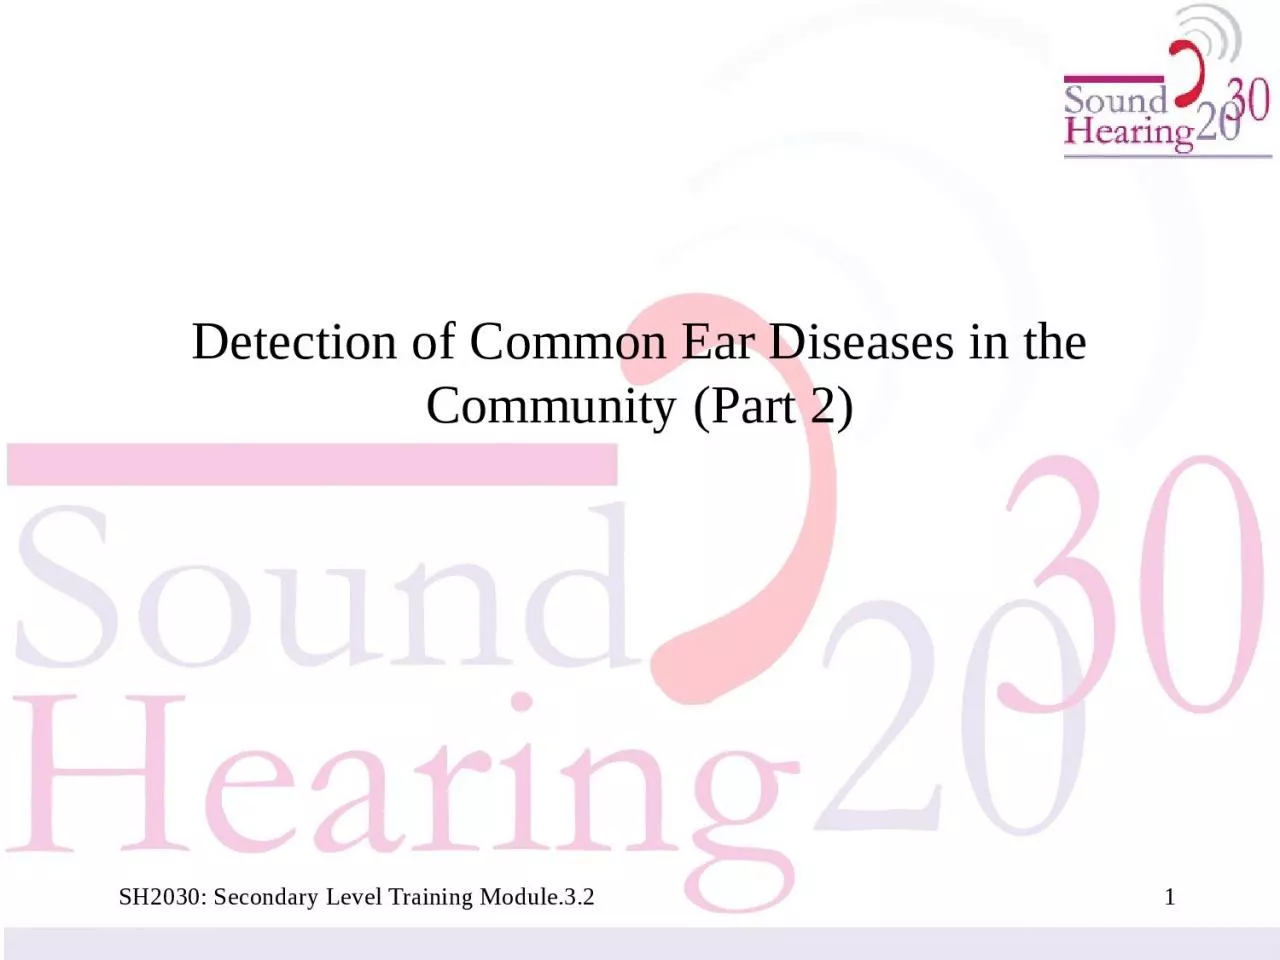 Detection of Common Ear Diseases in the Community (Part 2)